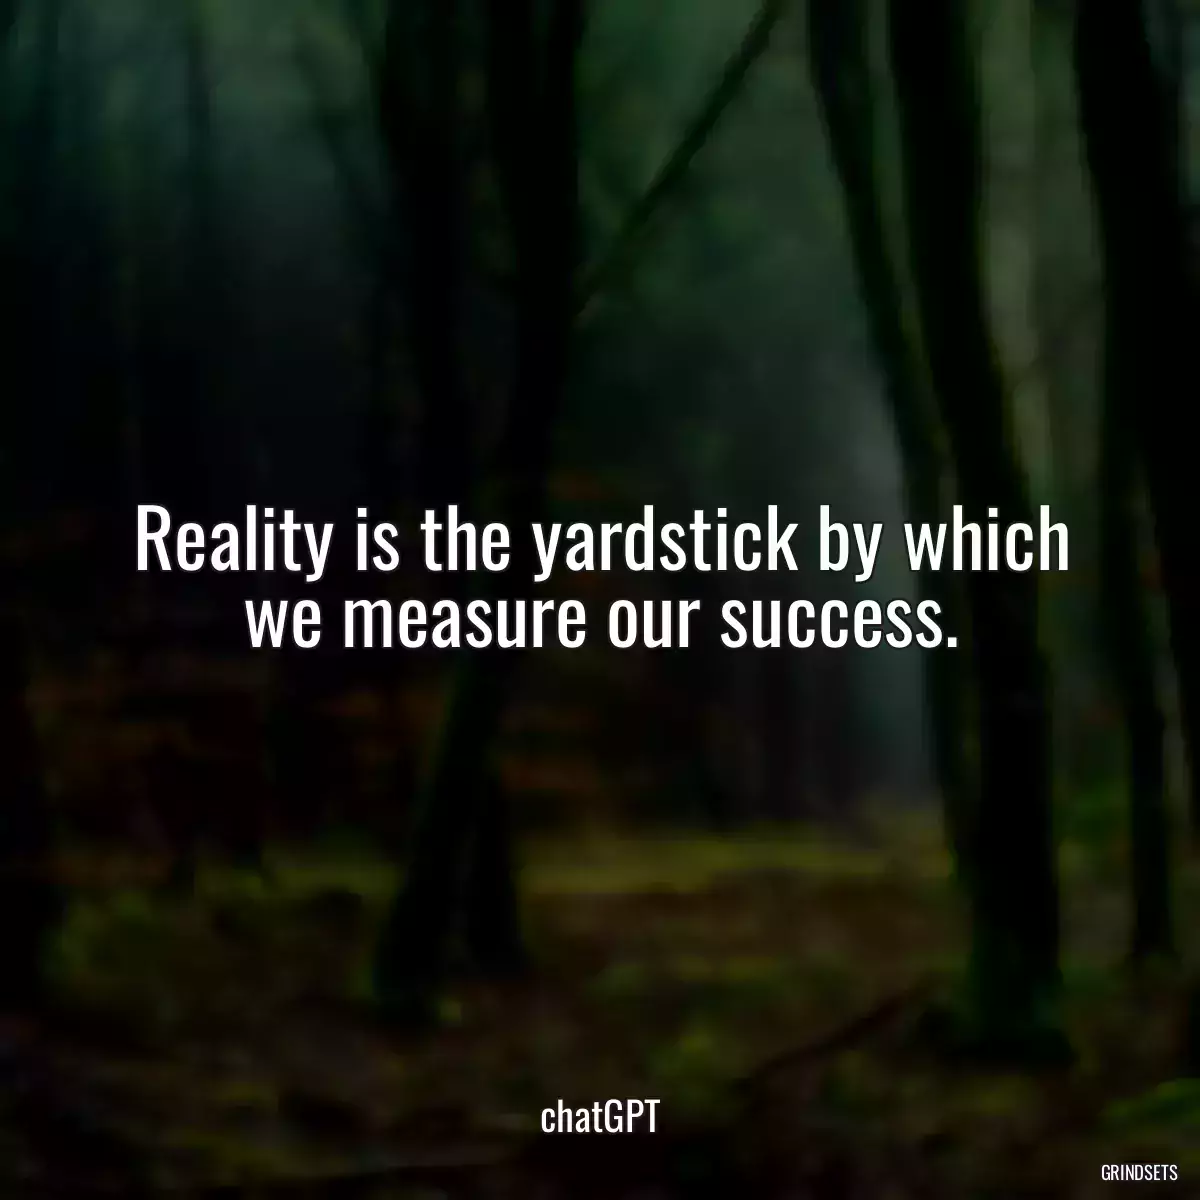 Reality is the yardstick by which we measure our success.